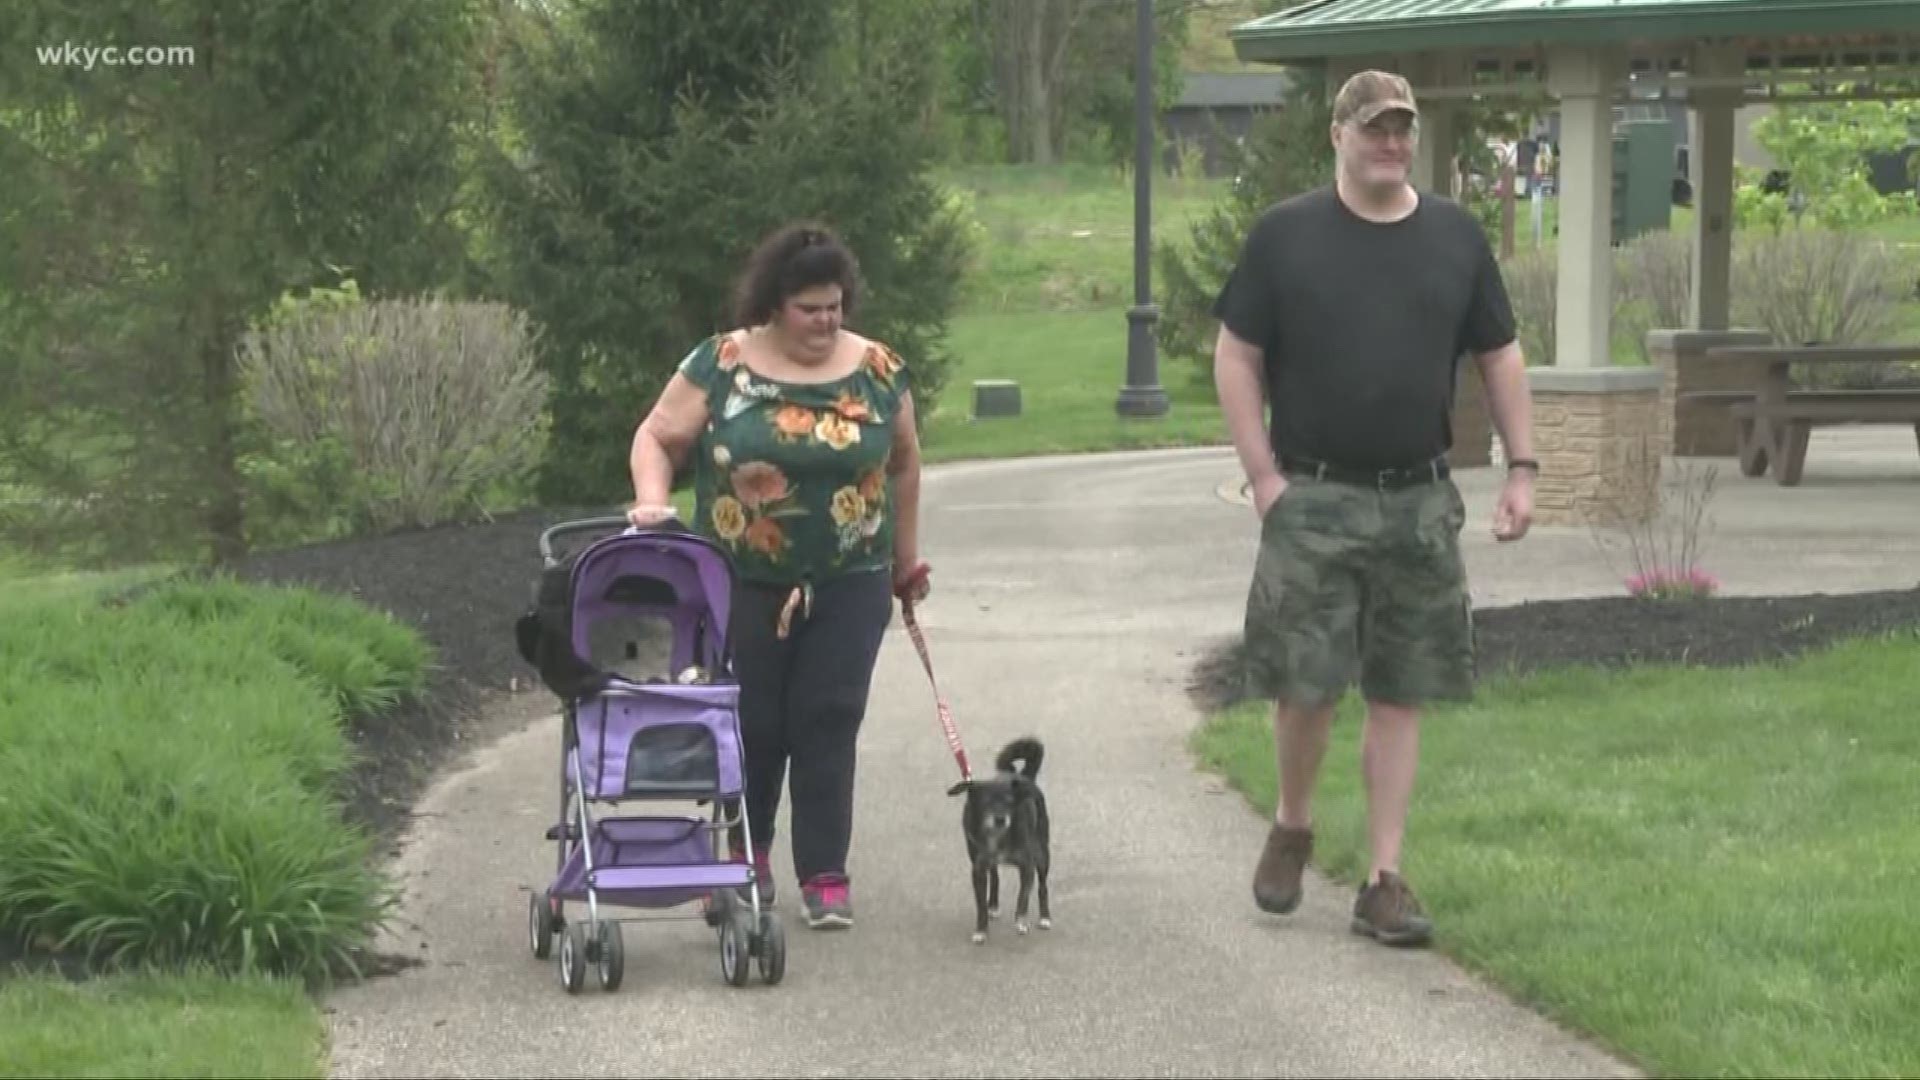 May 29, 2019: A service dog is not a pet. Unfortunately, some people might confuse the two. Melissa Moyers has firsthand experience with the danger of this misconception since her service dog Angela has been in her life for years.